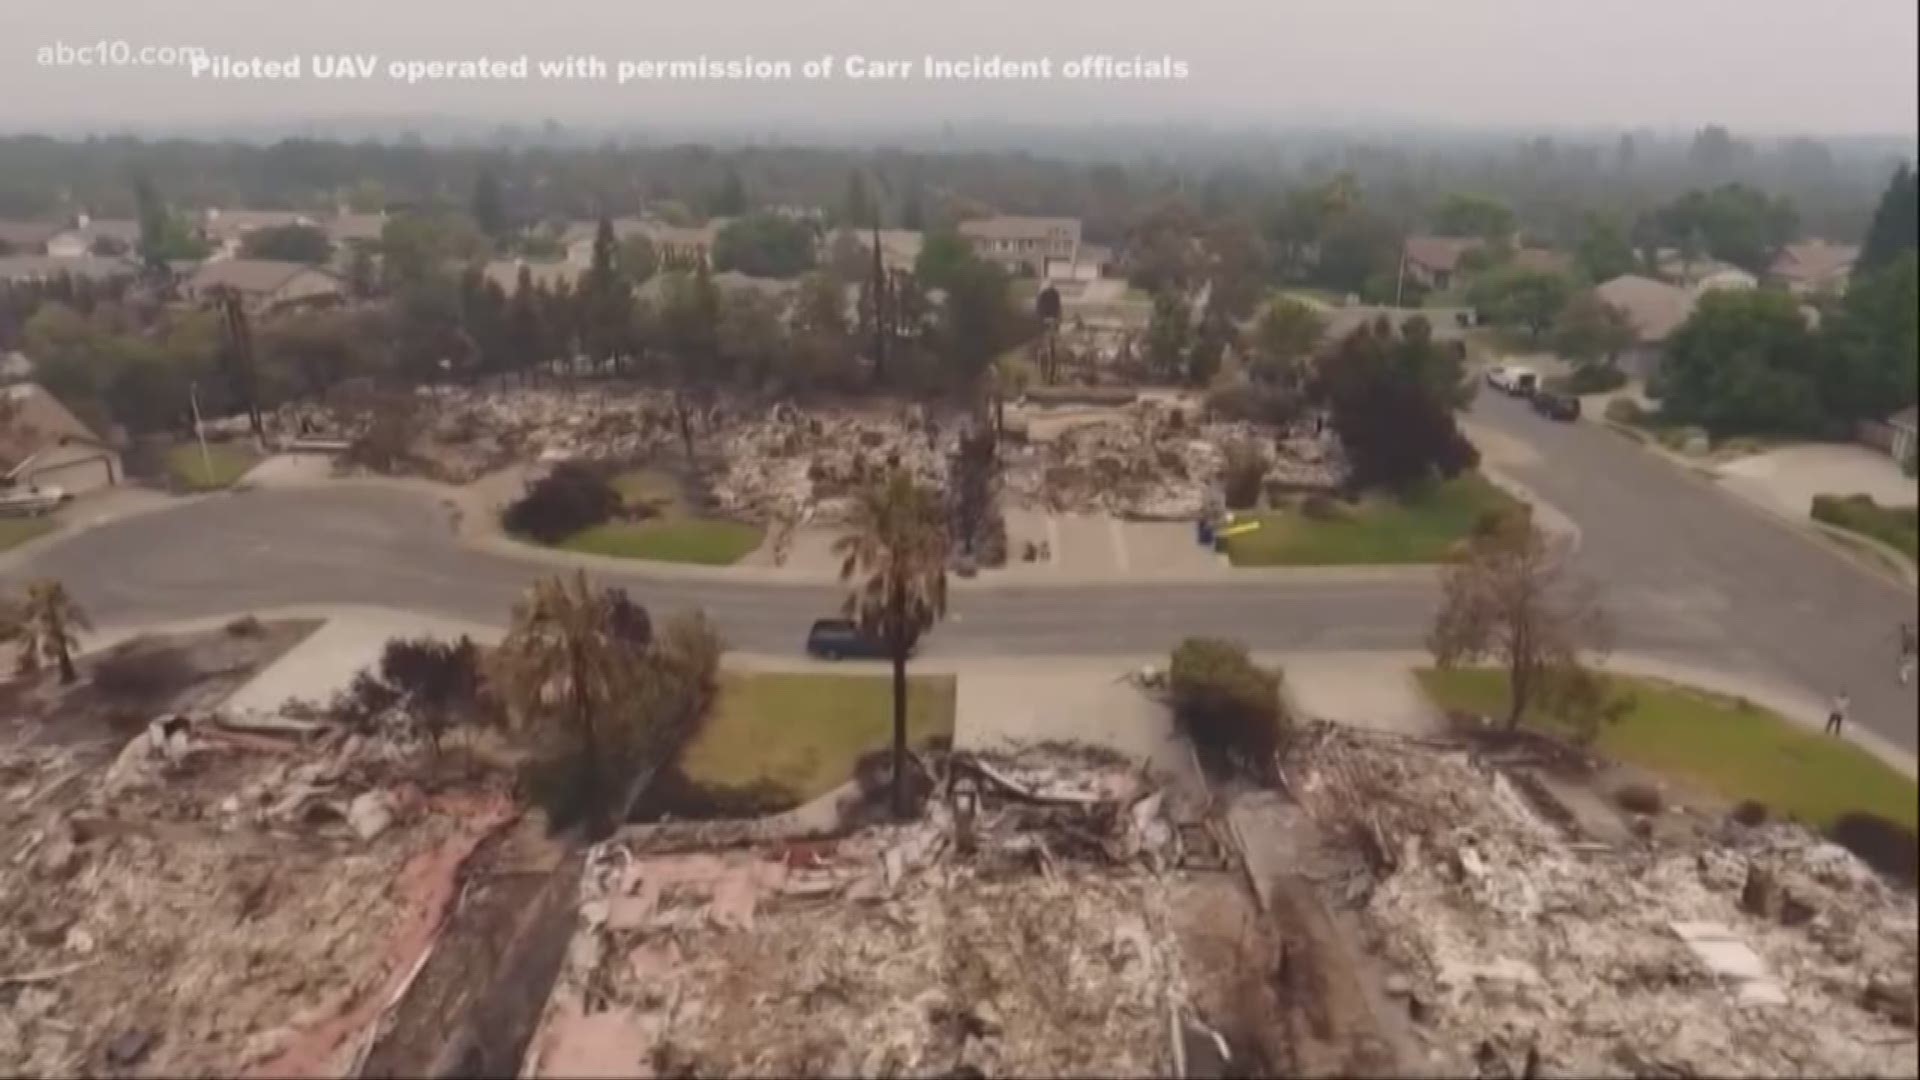 ABC10 has learned dozens of warnings were issued during the evacuations, raising questions about whether their deaths were preventable.